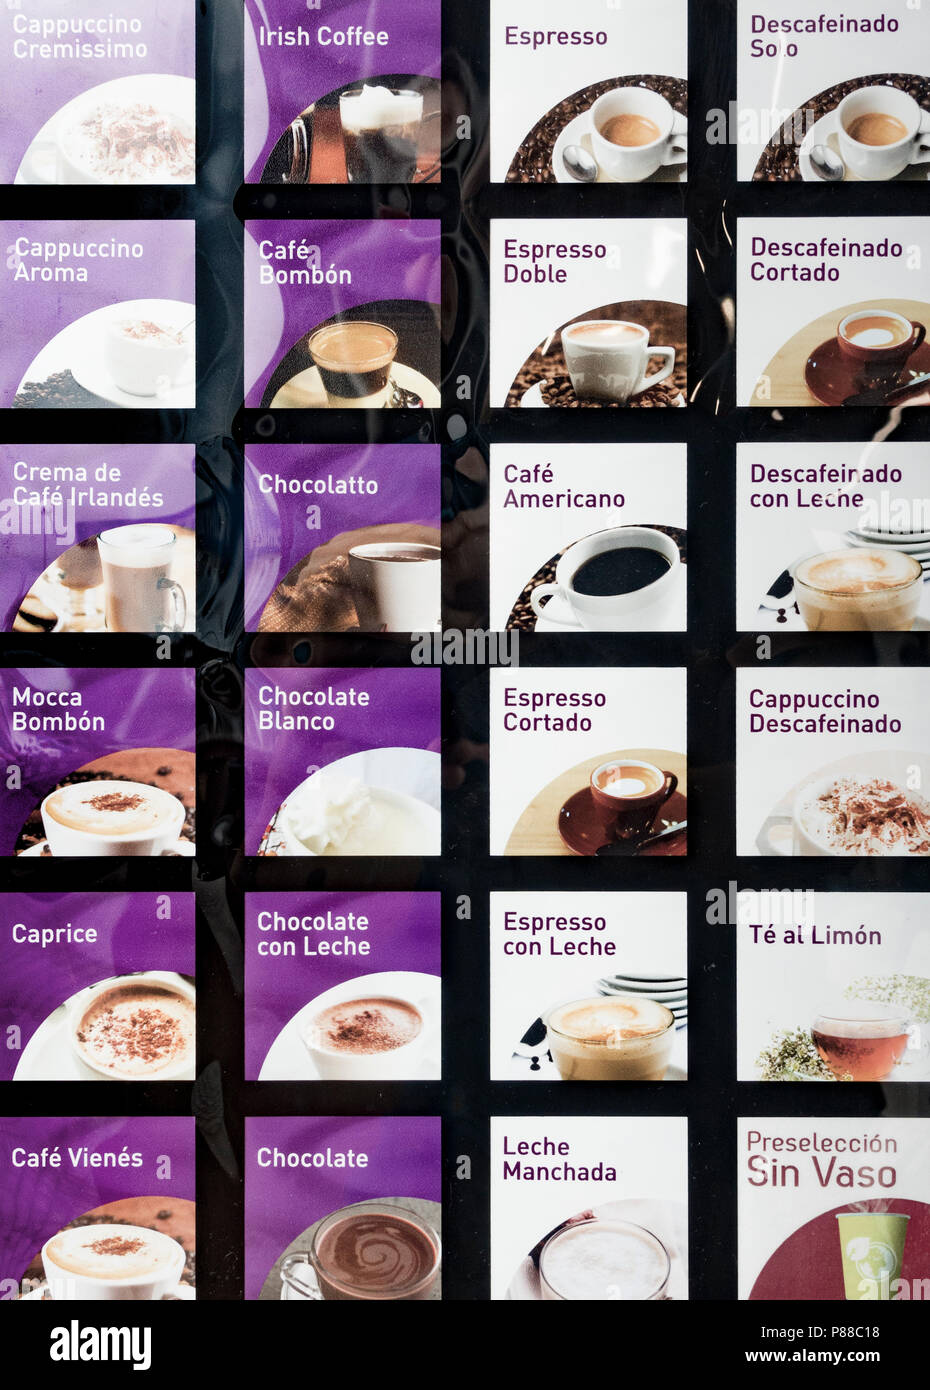 Vending machine with different types of coffee. Menu in Spanish Stock Photo